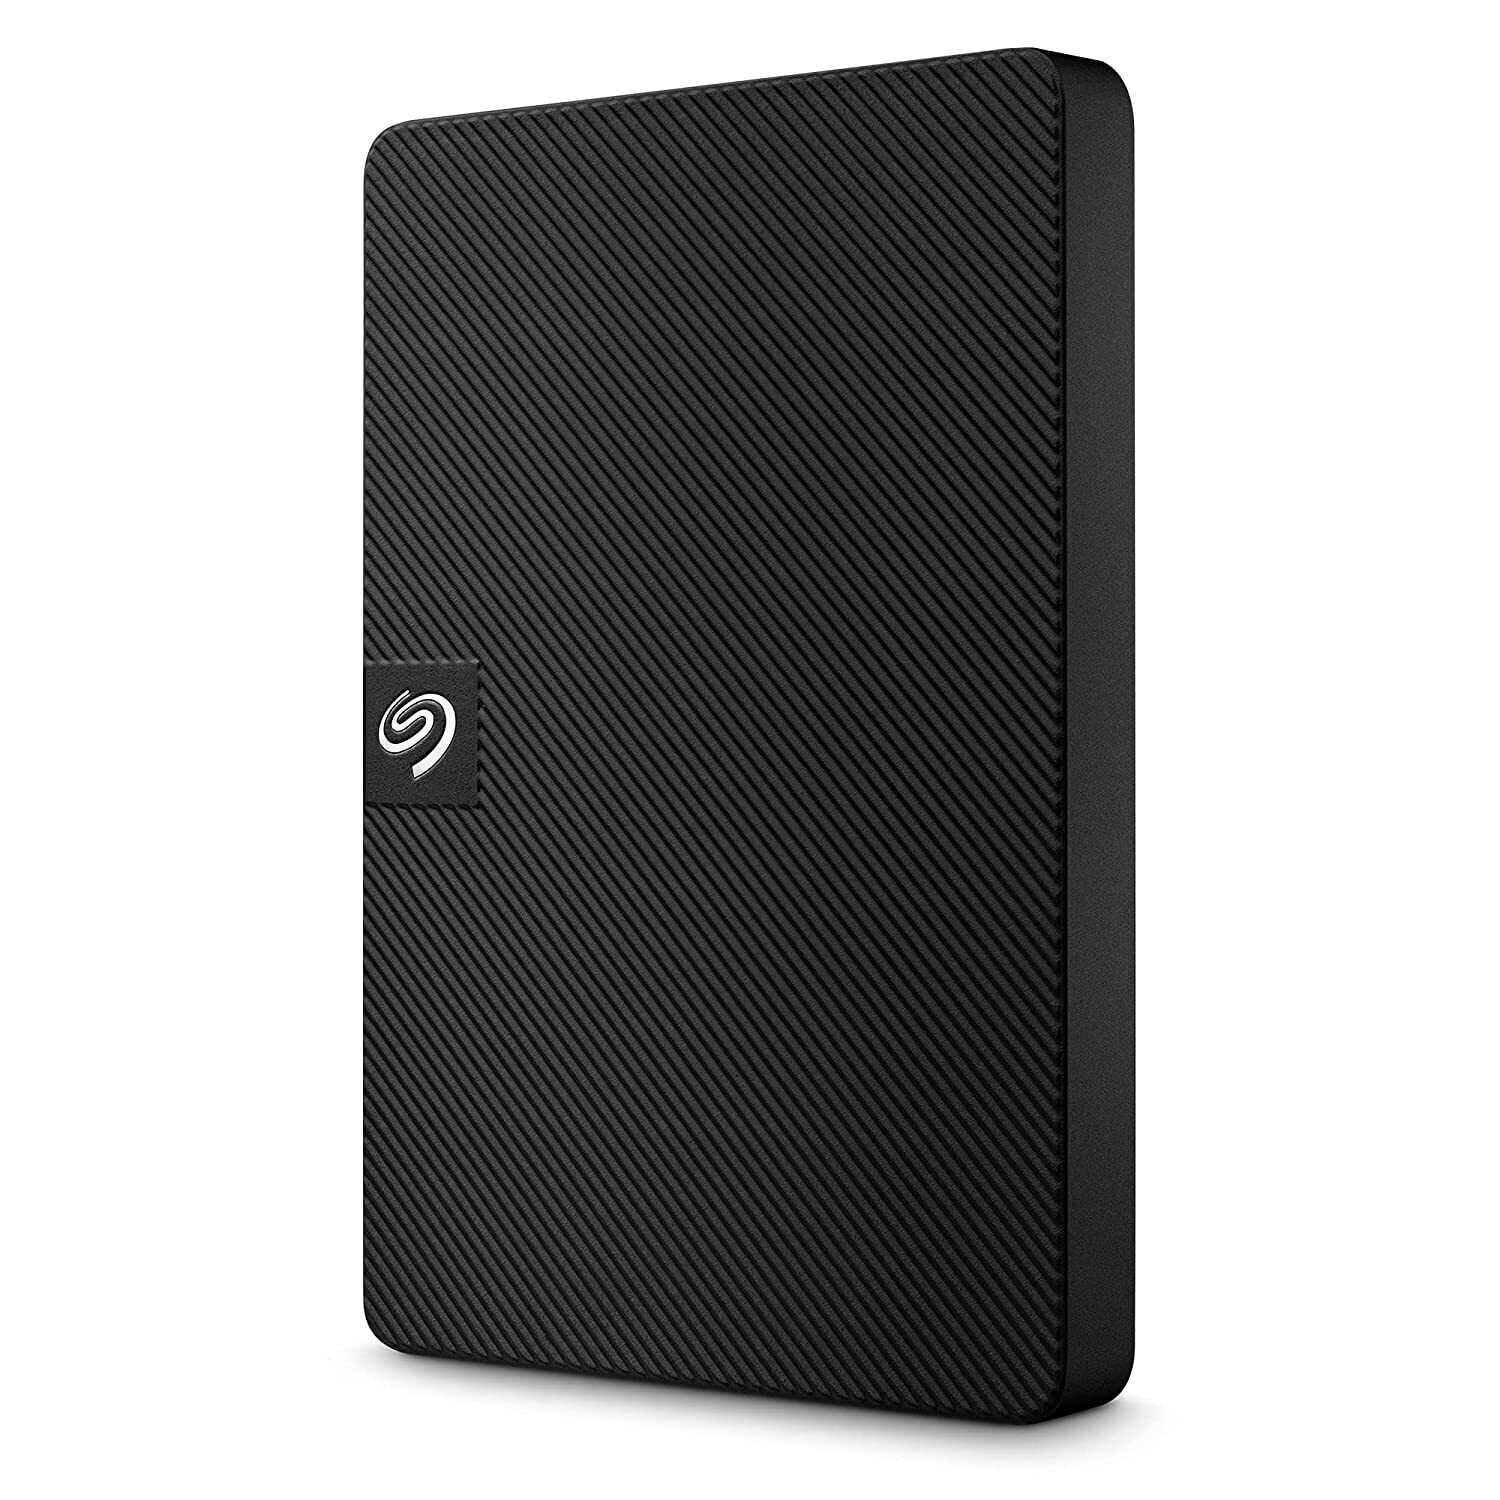 Seagate 4TB Expansion External HDD